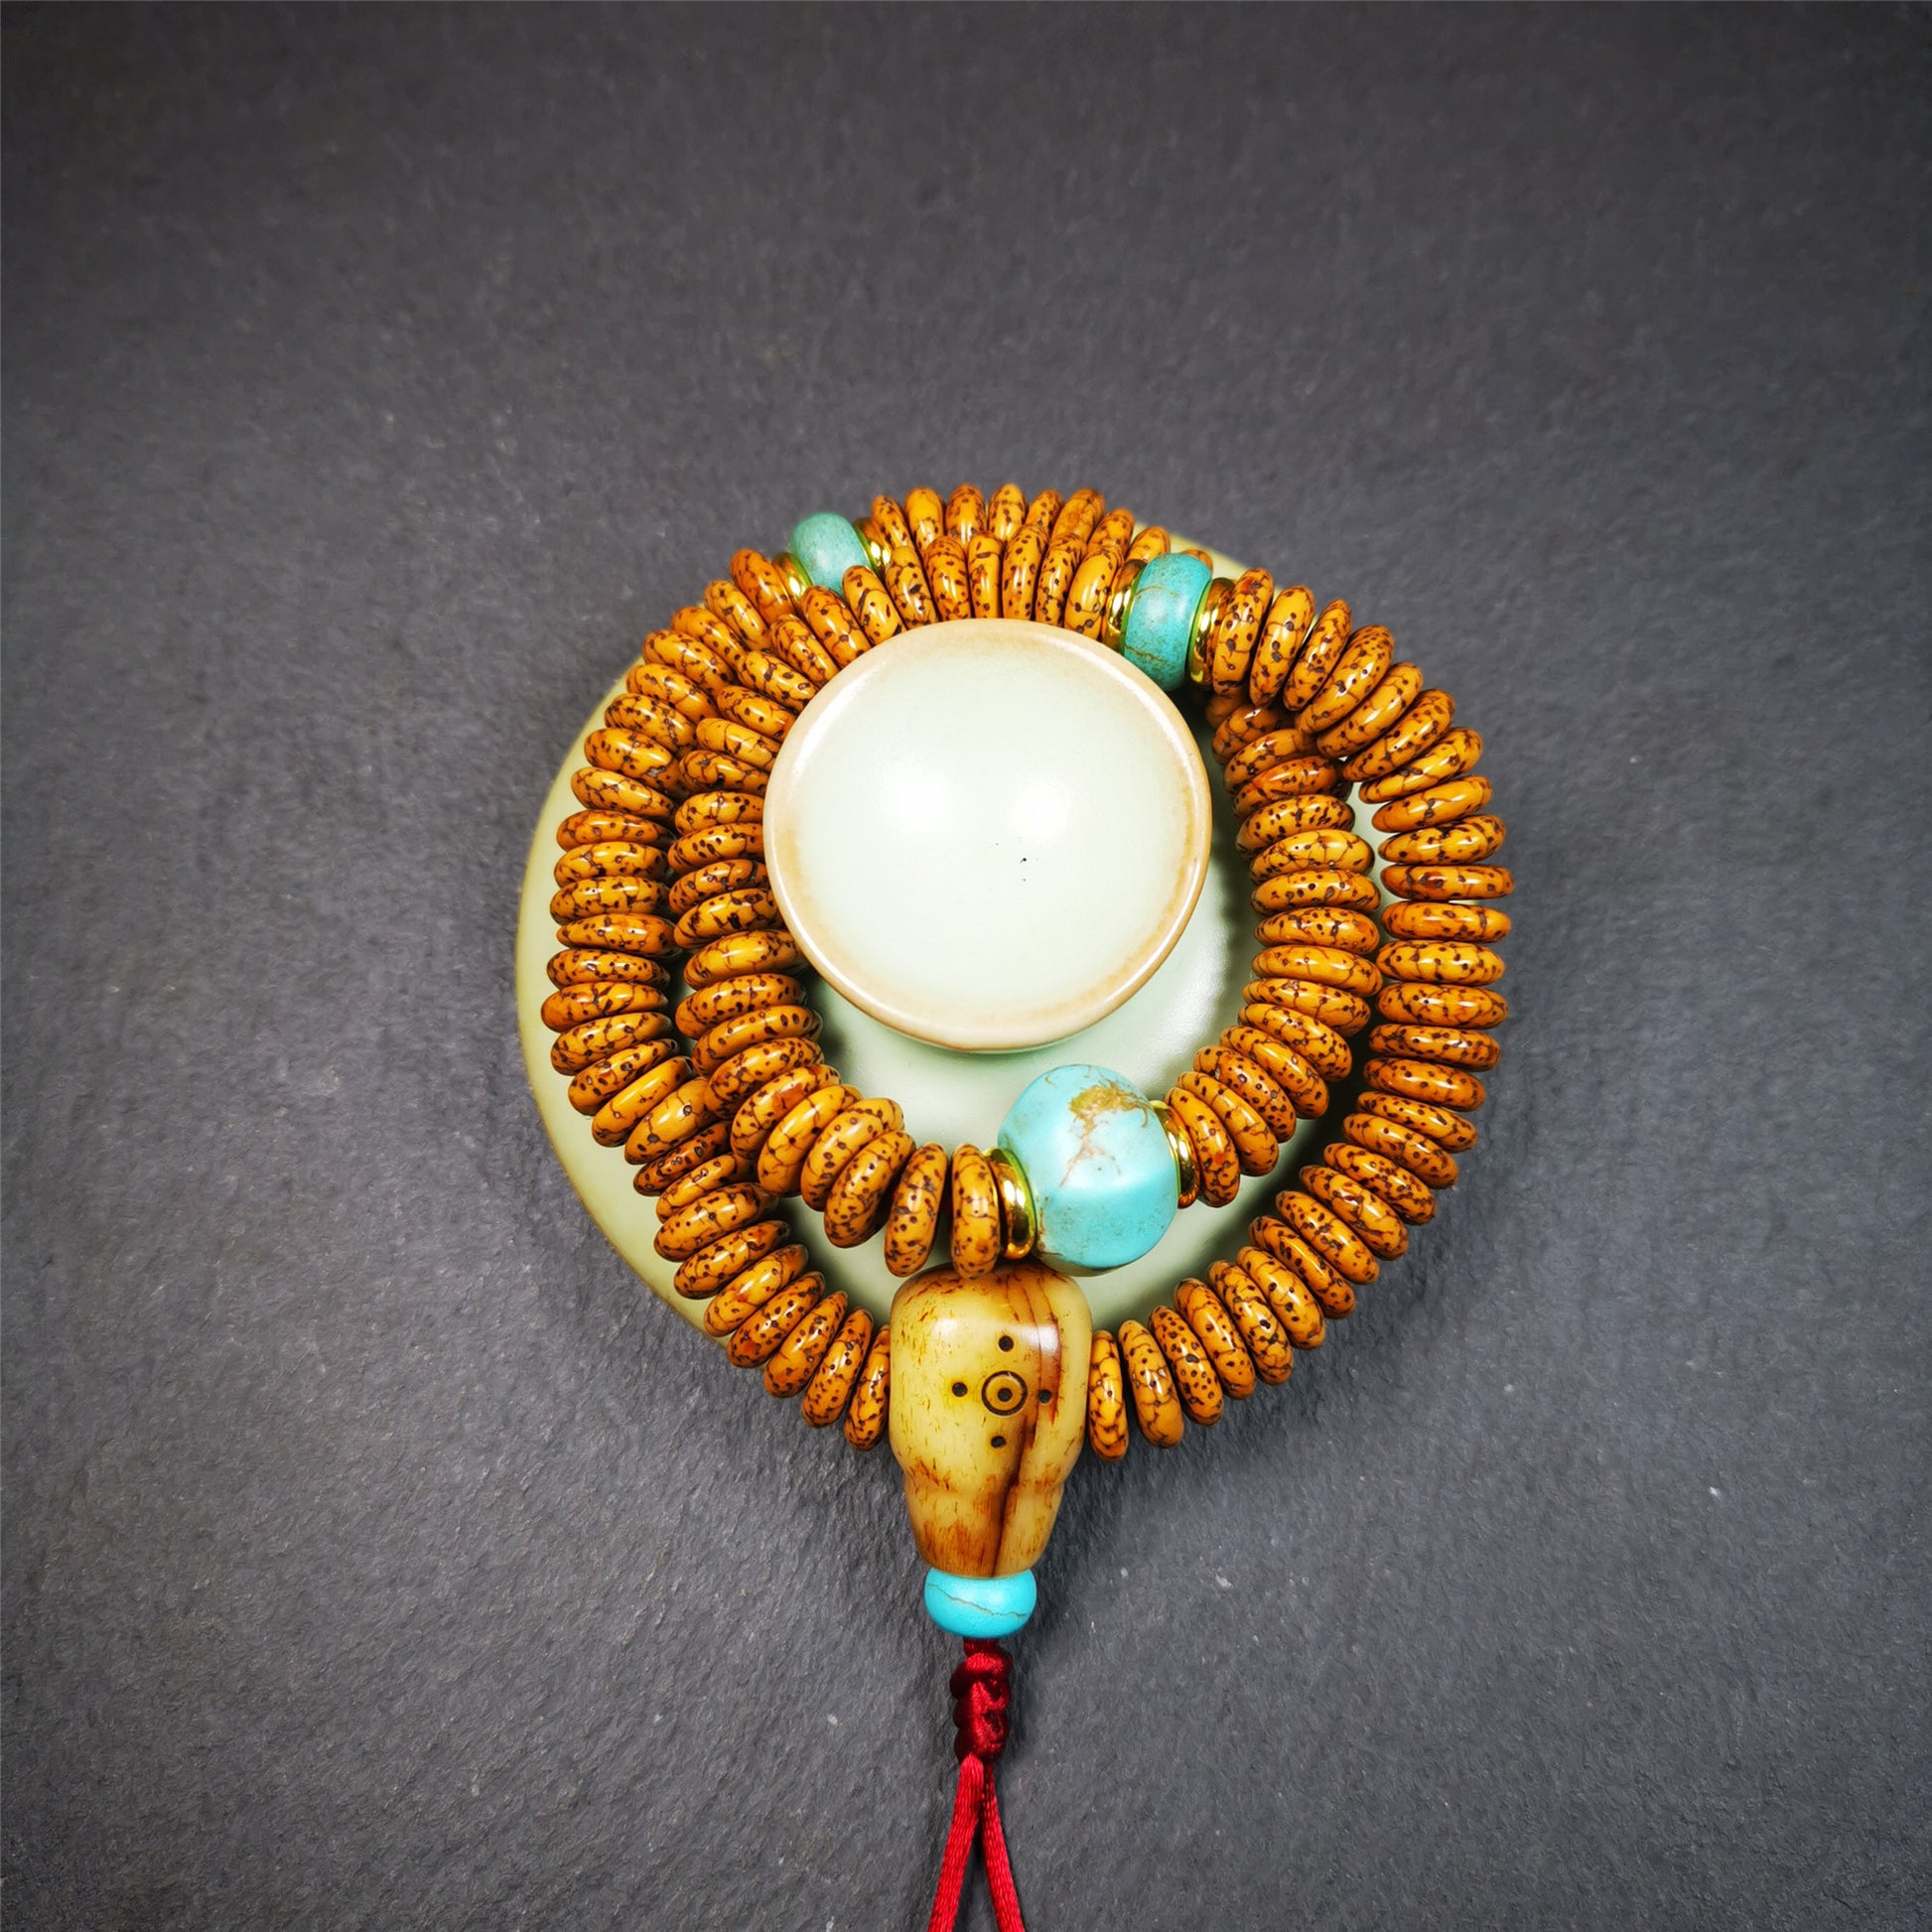 This flat lotus seed mala was collected from Gerze county,about 30 years old,hold and blessed by a lama. It is composed of 108 bodhi seed beads, flat cut shape,brown color,with 4 turquoise beads and 1 yak bone guru bead.